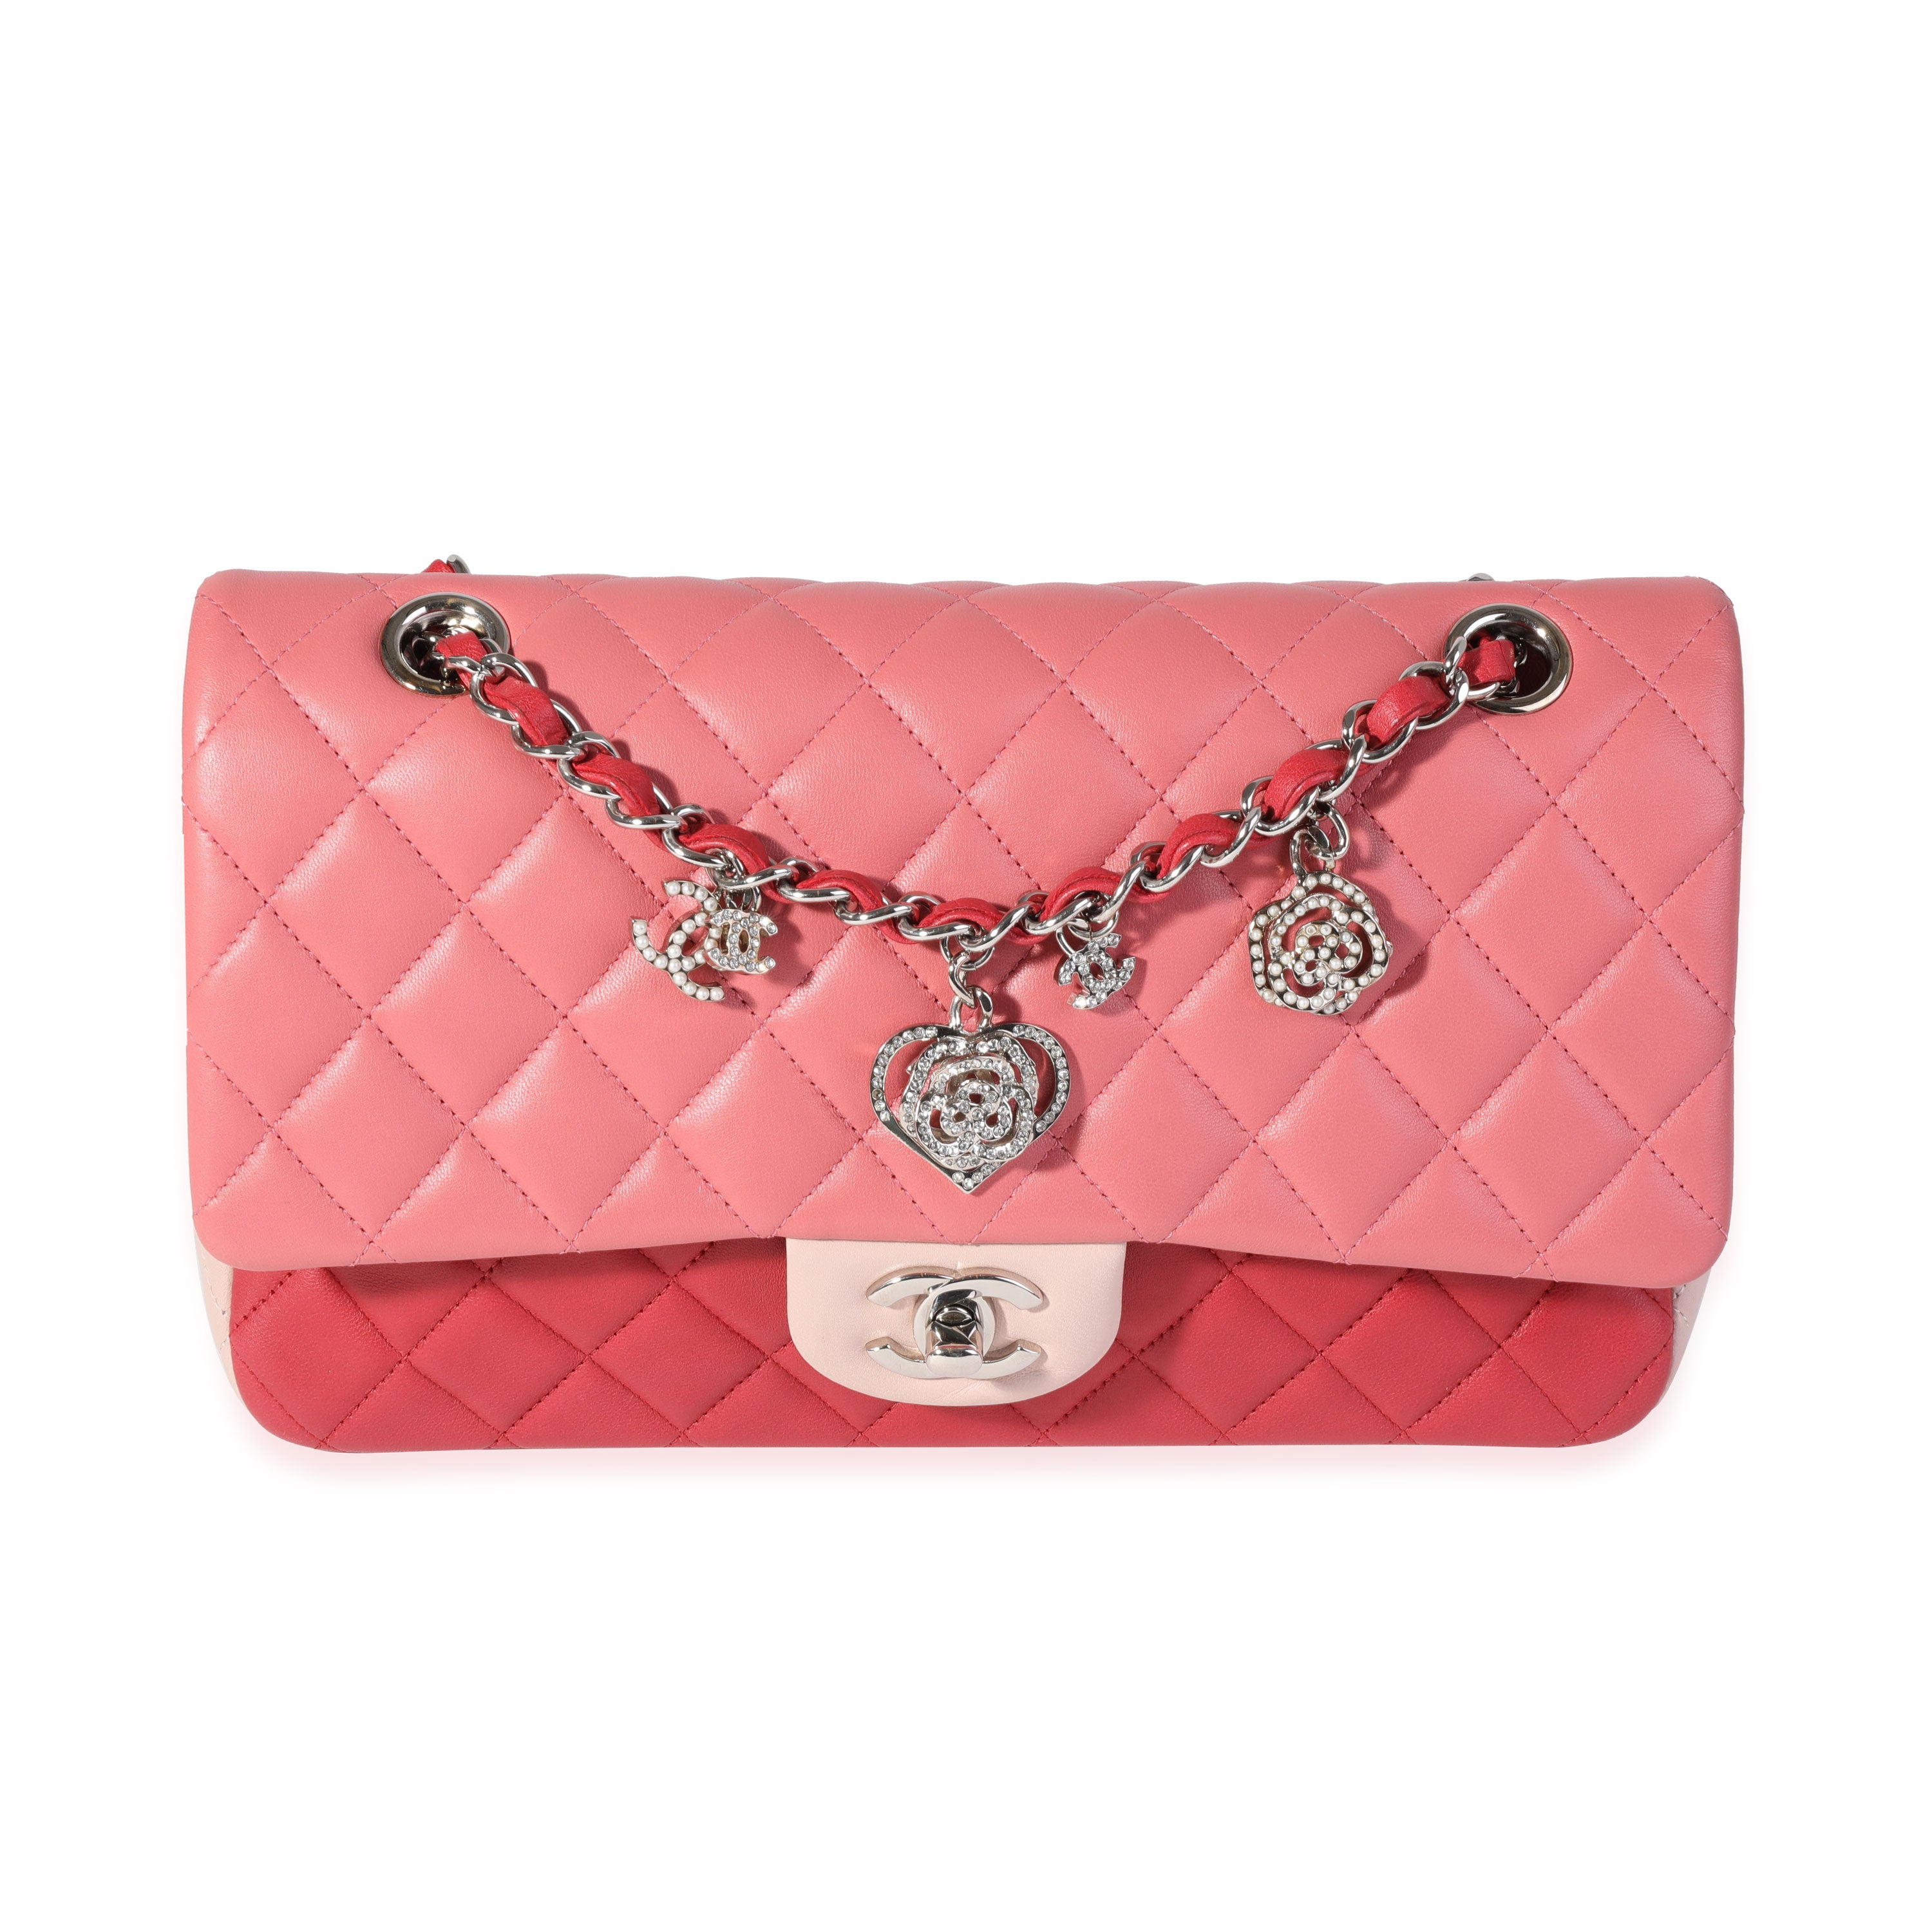 Chanel Pink & Red Quilted Lambskin Valentine's Day Single Flap Bag, myGemma, QA